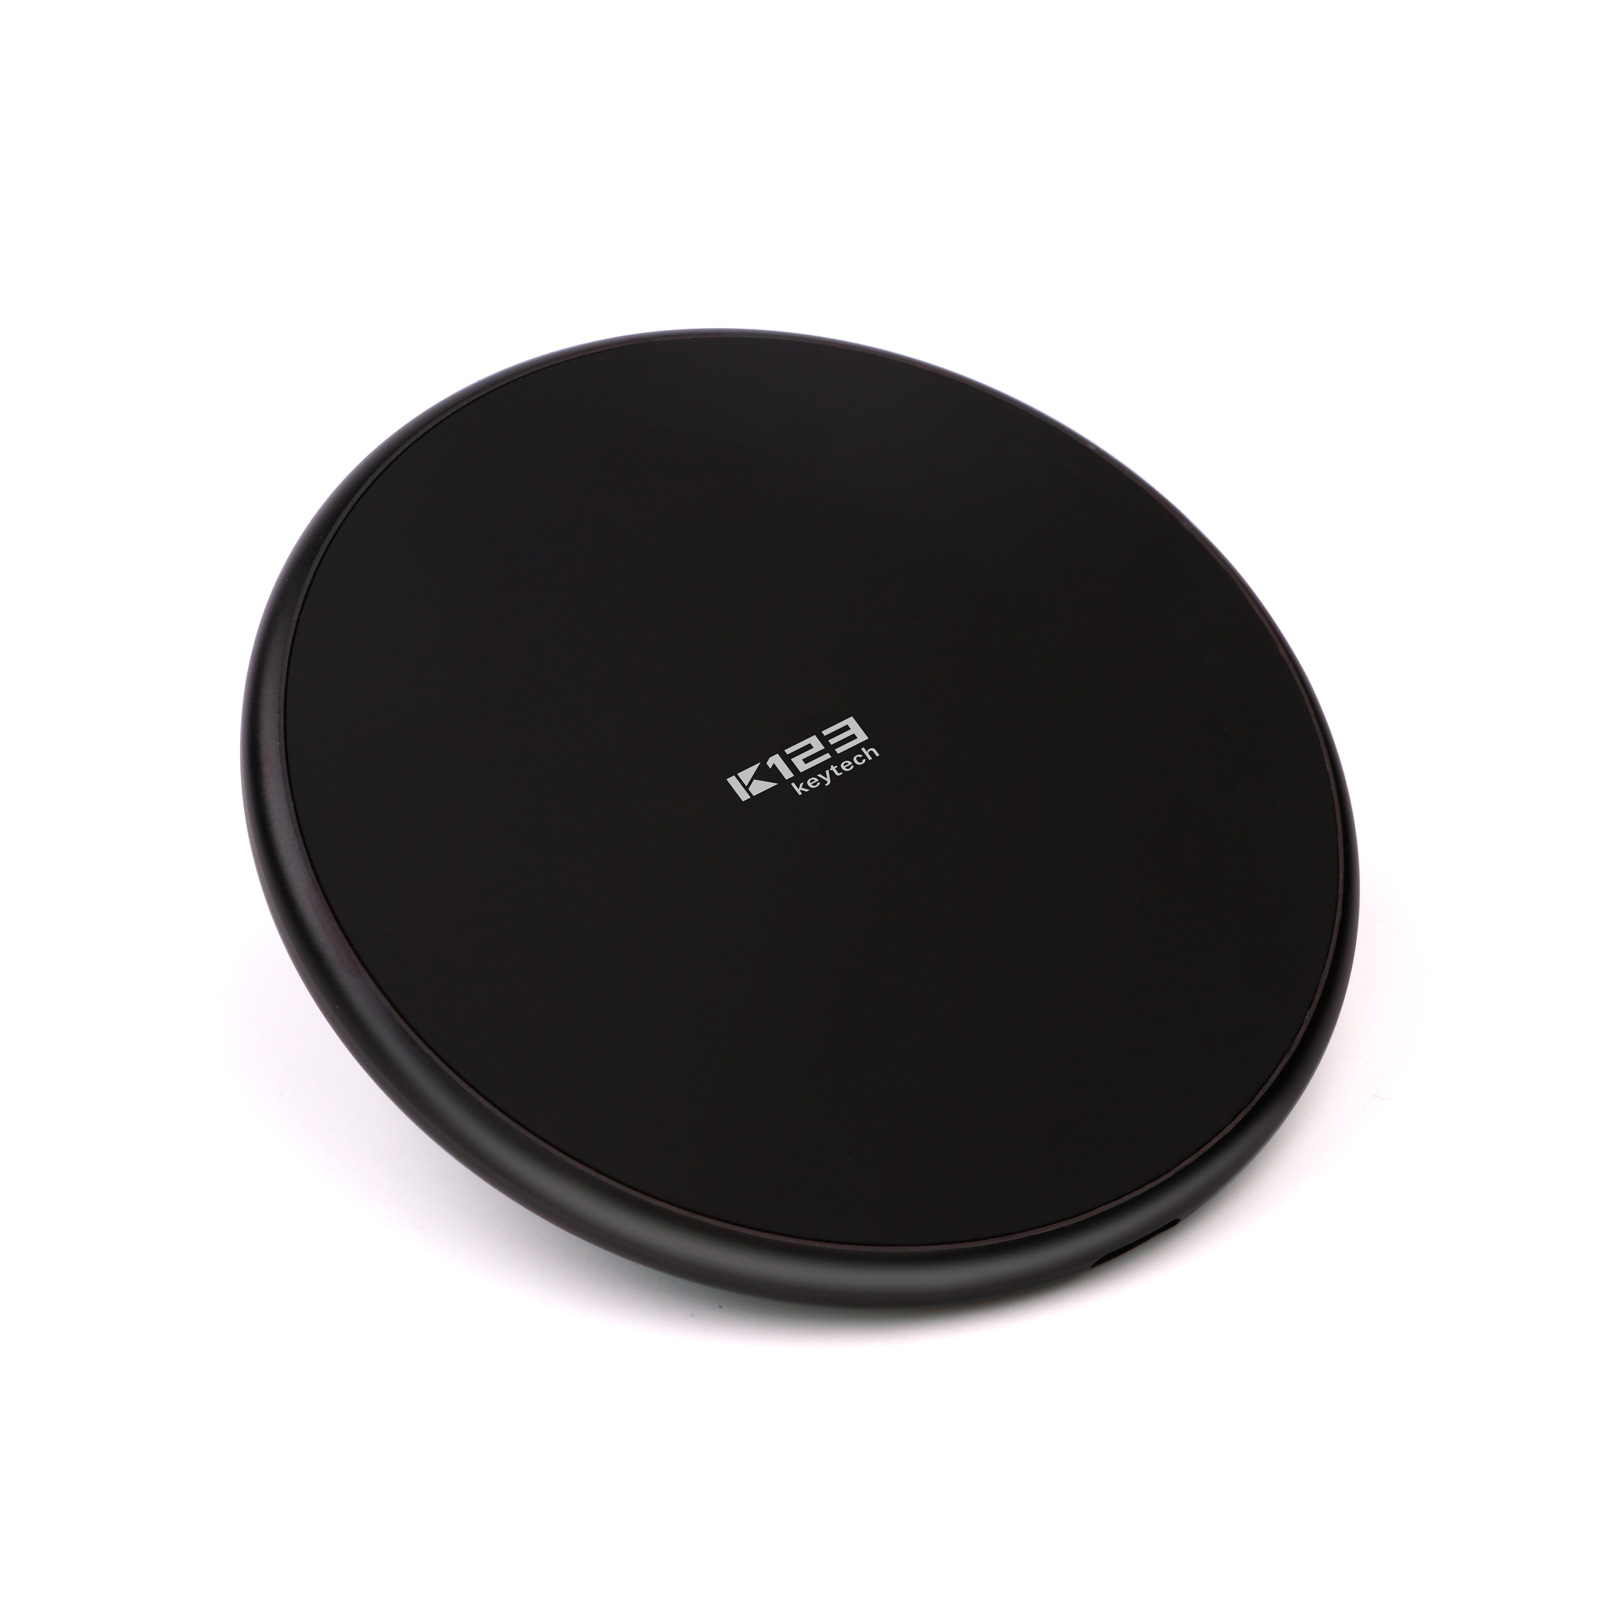 KWC002 Wireless Charger, 10W Qi -Certified Wireless Charzing Pad, Compatible iPhone Xs Max /XR /XS /X /8 /8Plus -copy -15596274